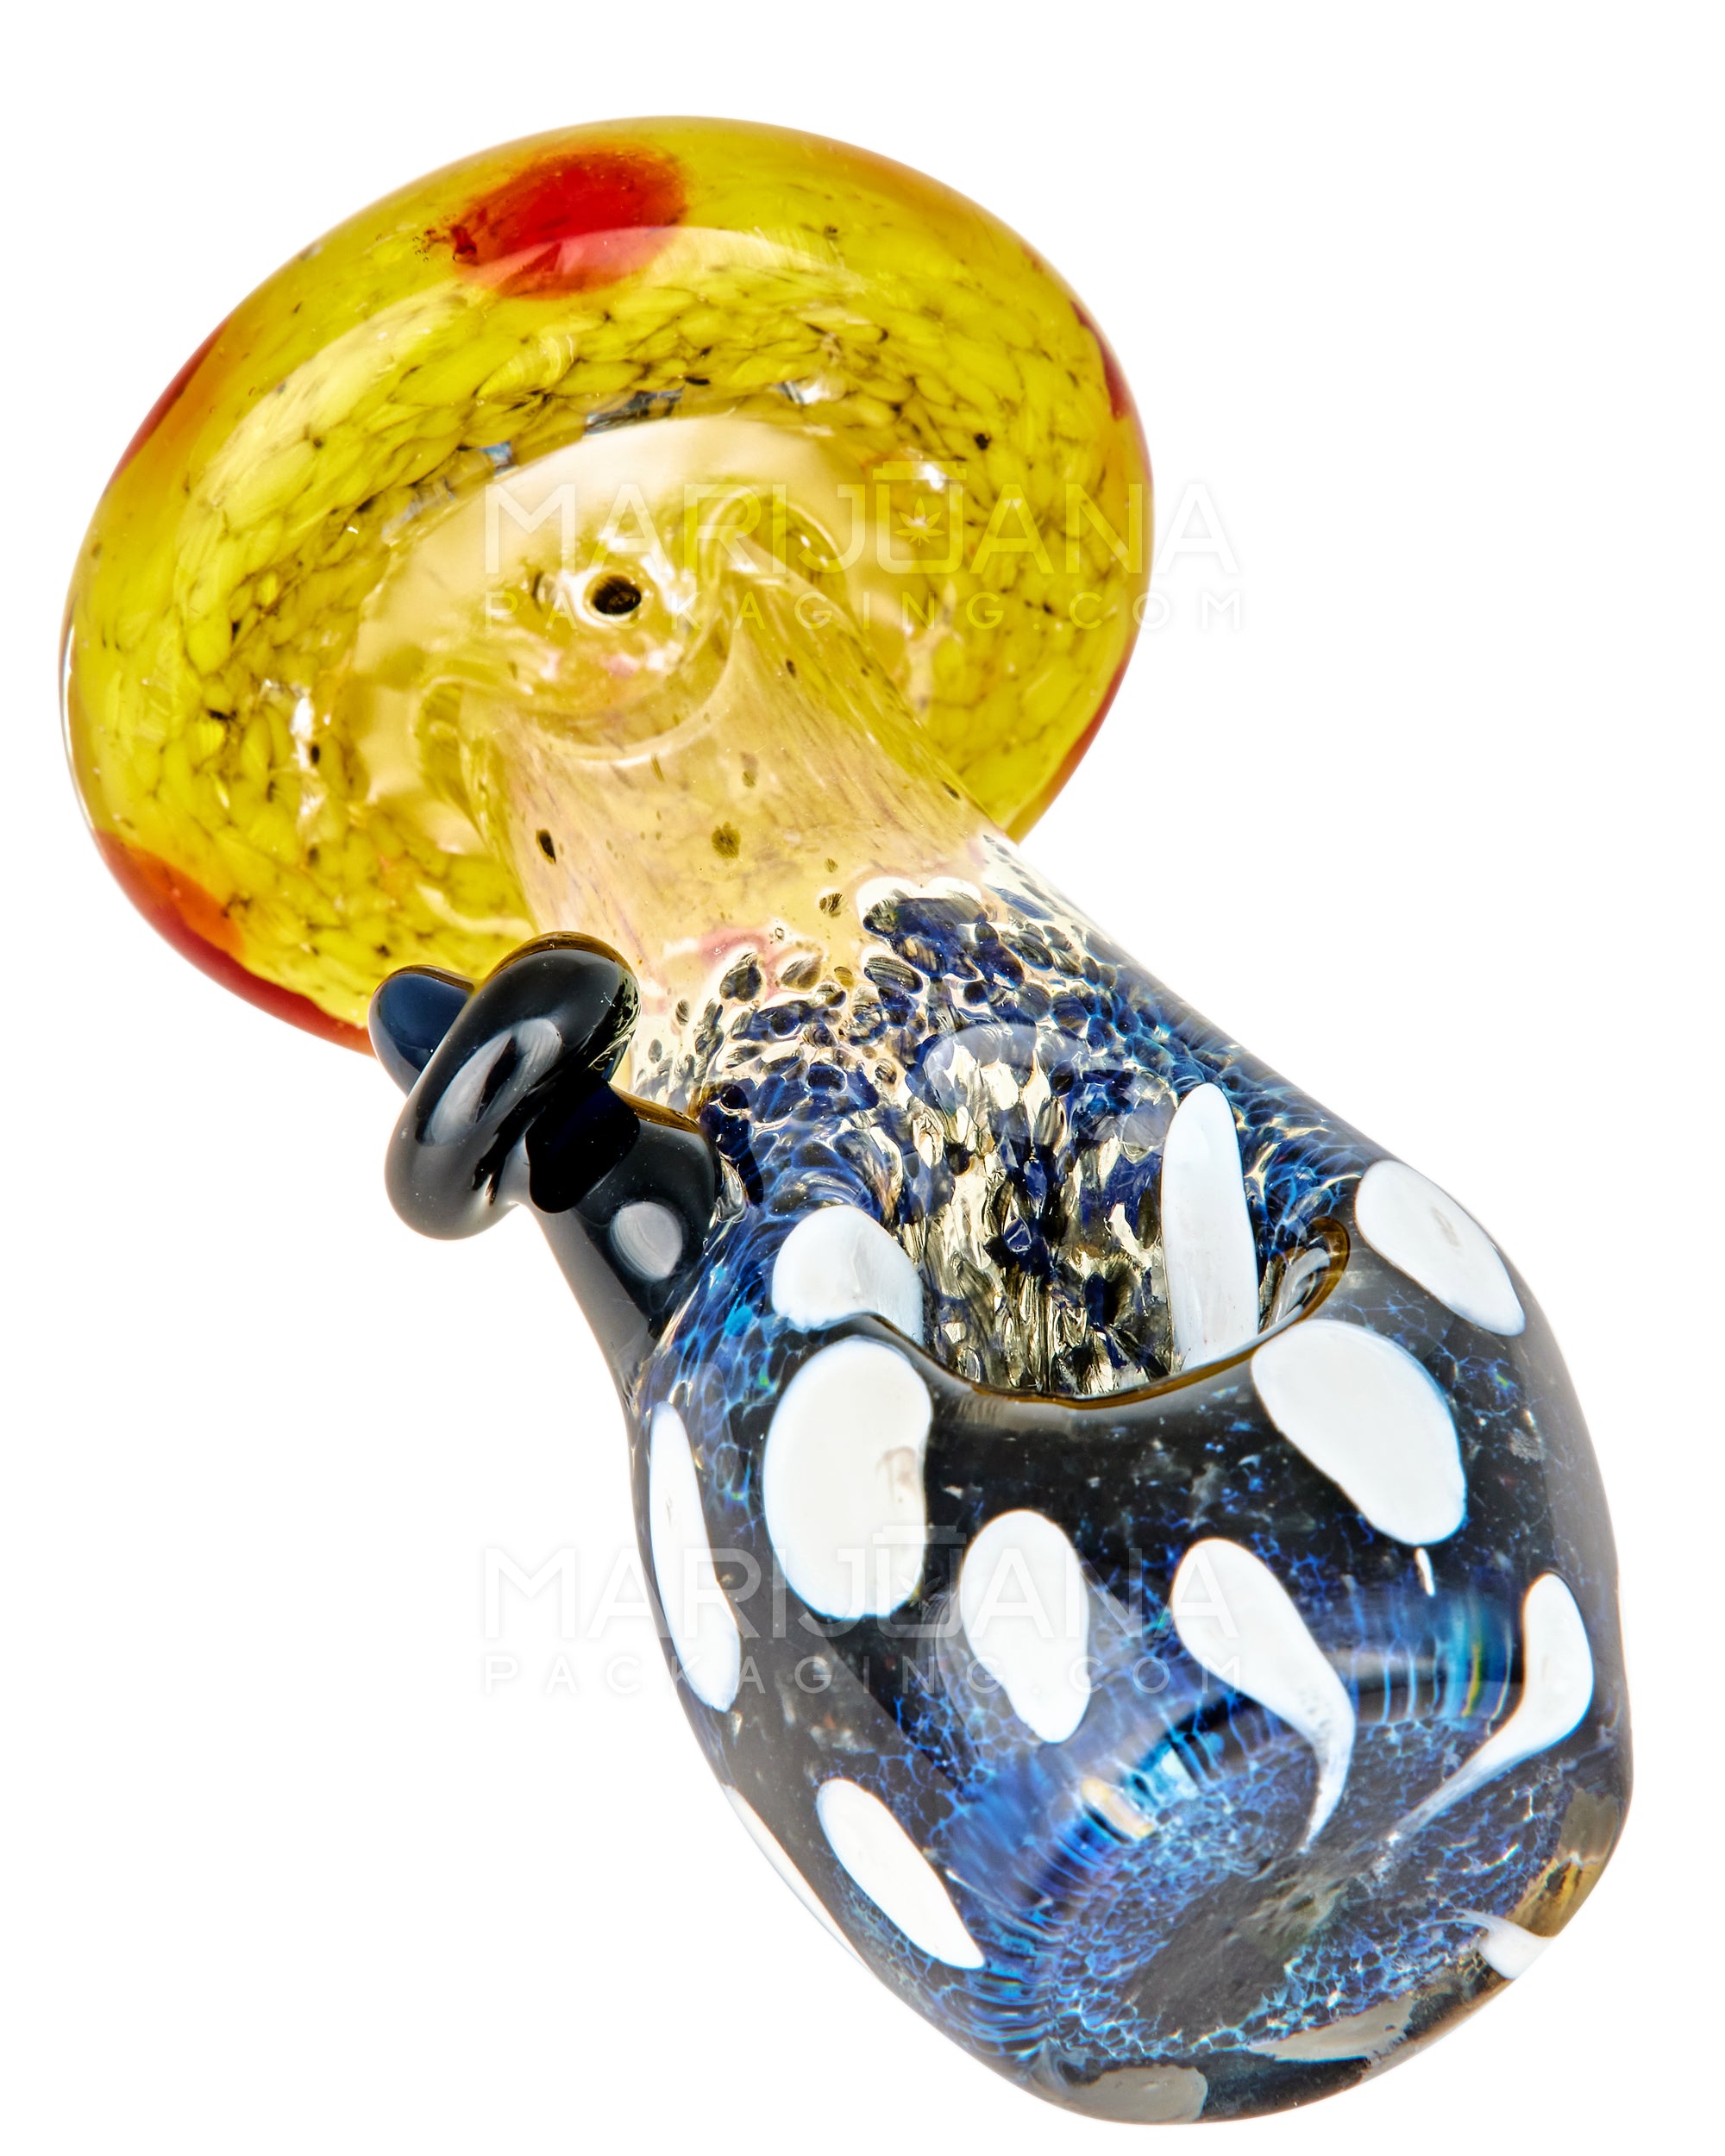 Frit & Multi Fumed Mushroom Hand Pipe w/ Ribboning & Glass Handle | 4in Long - Glass - Gold - 1